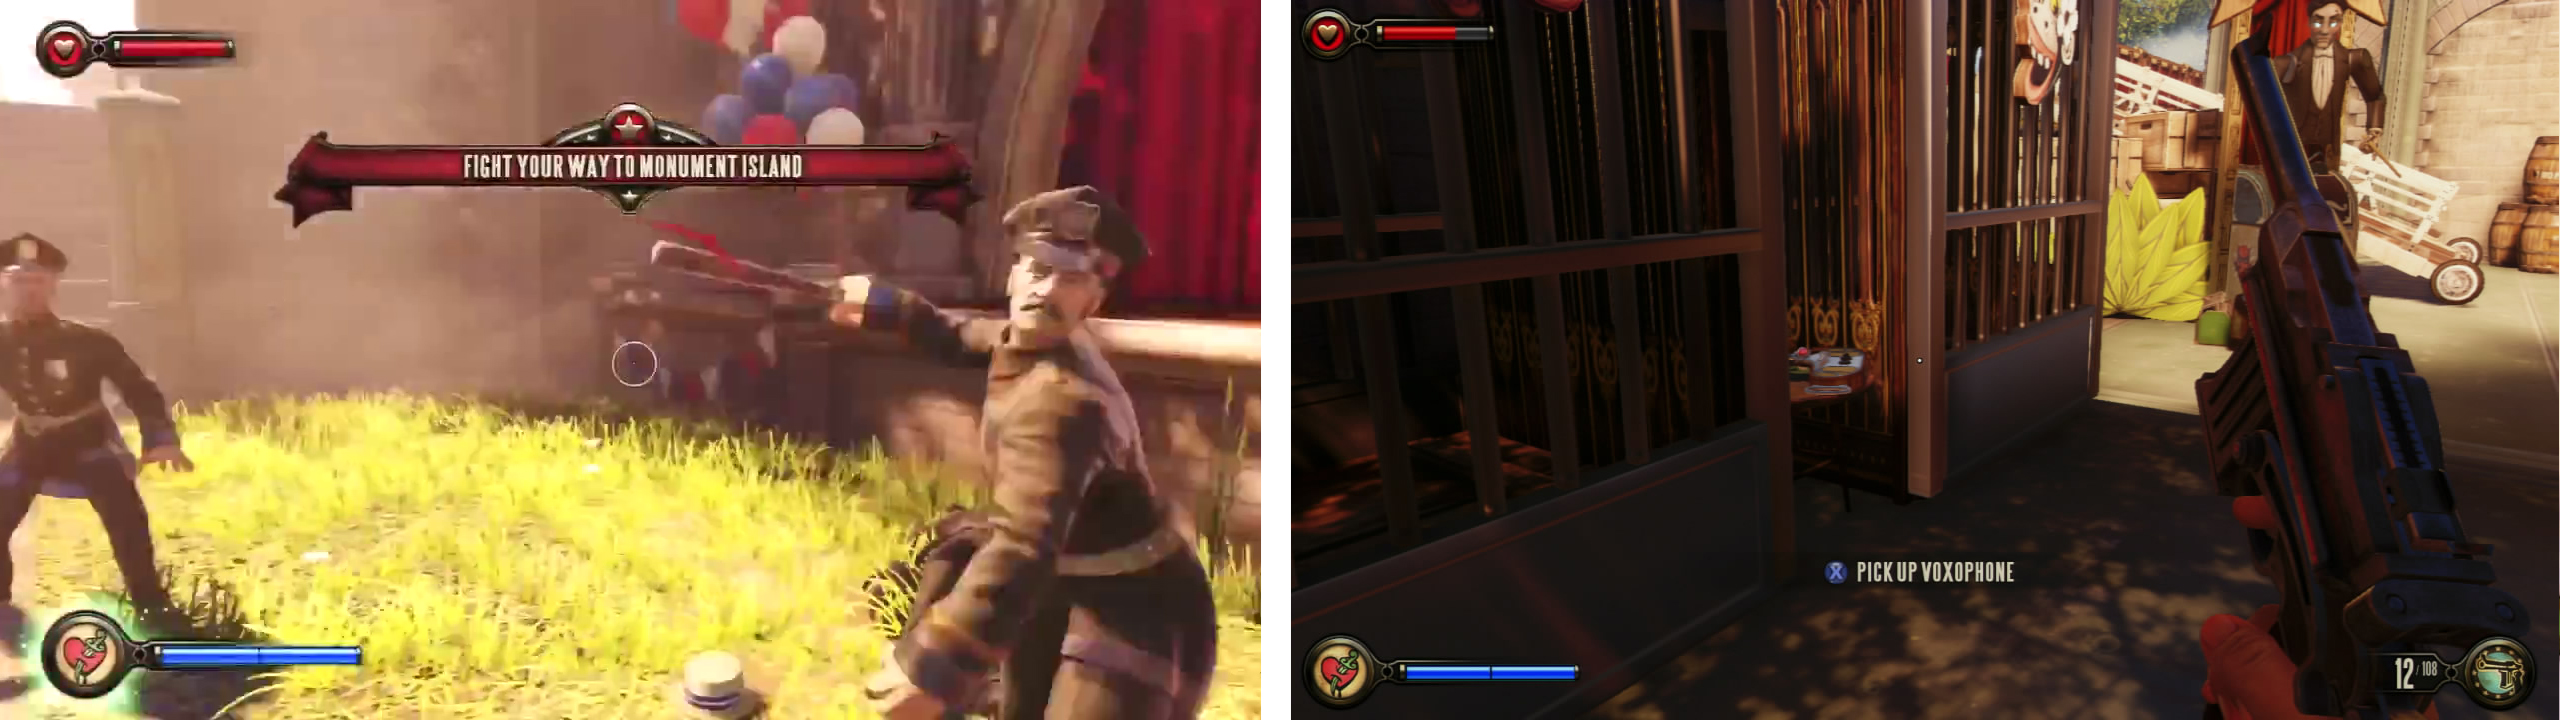 Fight your way through the policemen (left). Keep an eye out for the Voxophone between a pair of cages (right).